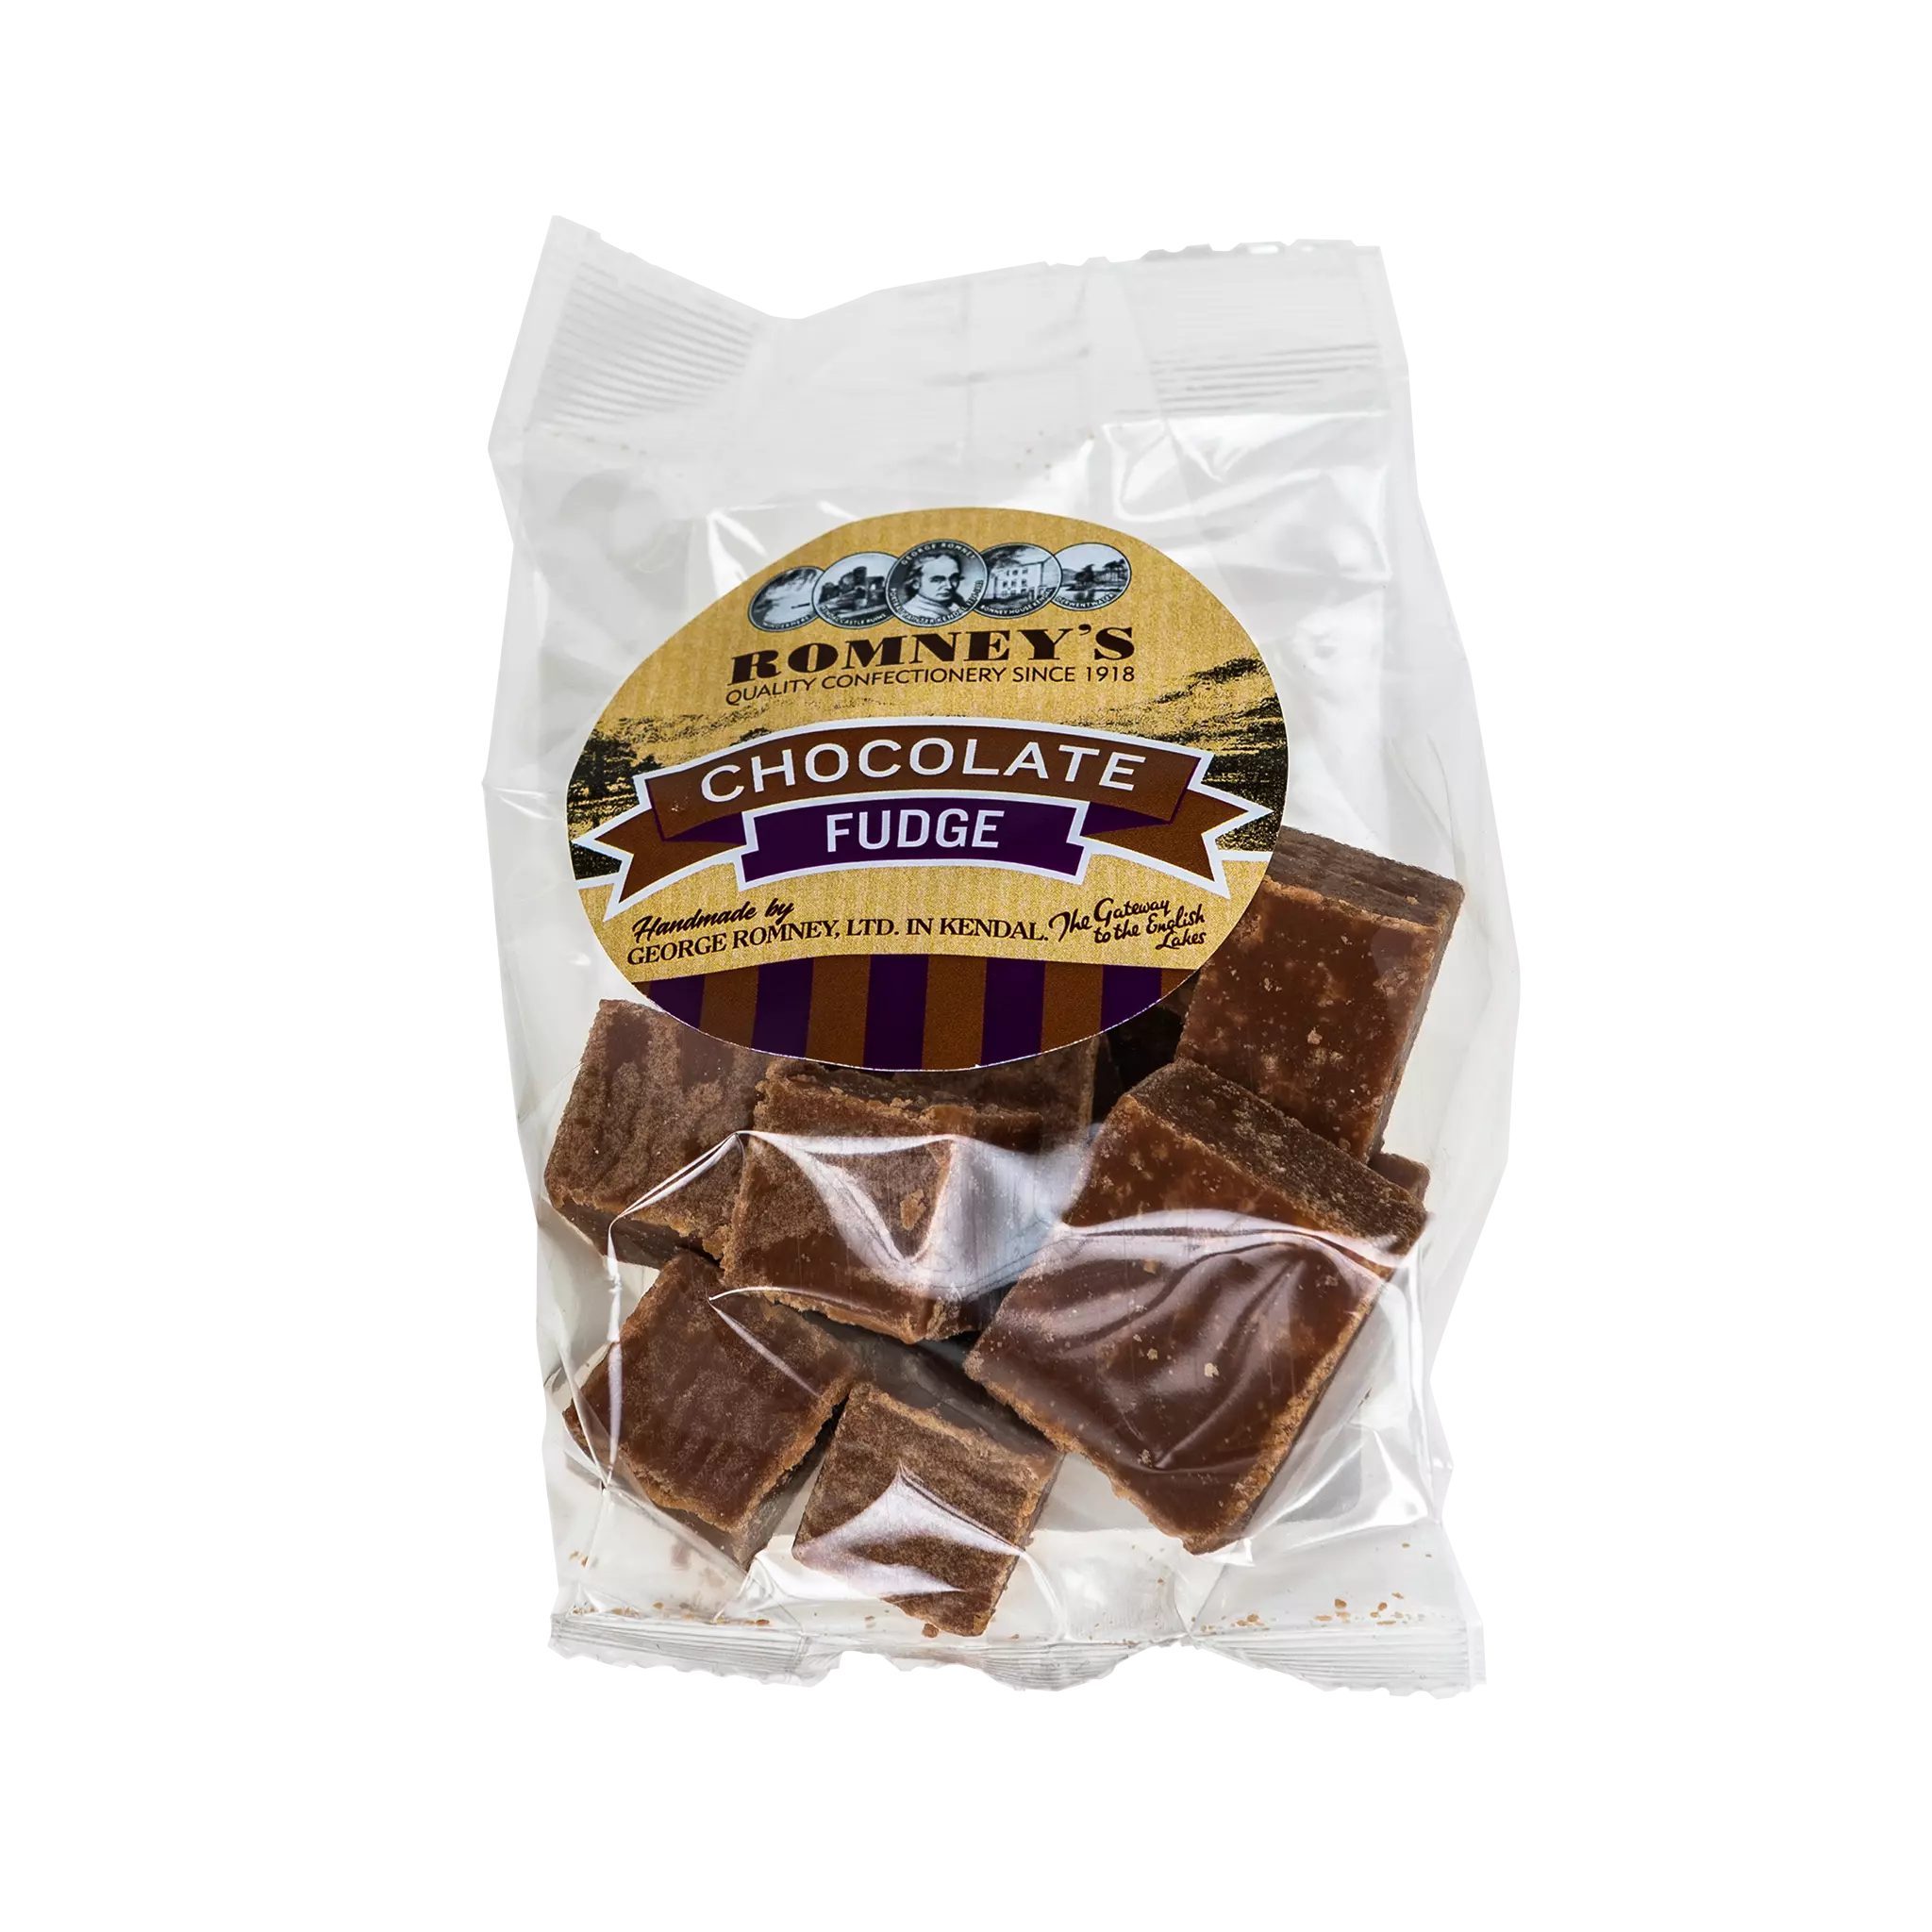 A transparent bag containing pieces of Fudge. The bag has a label on it that shows Romney's logo and says 'Chocolate Fudge'.